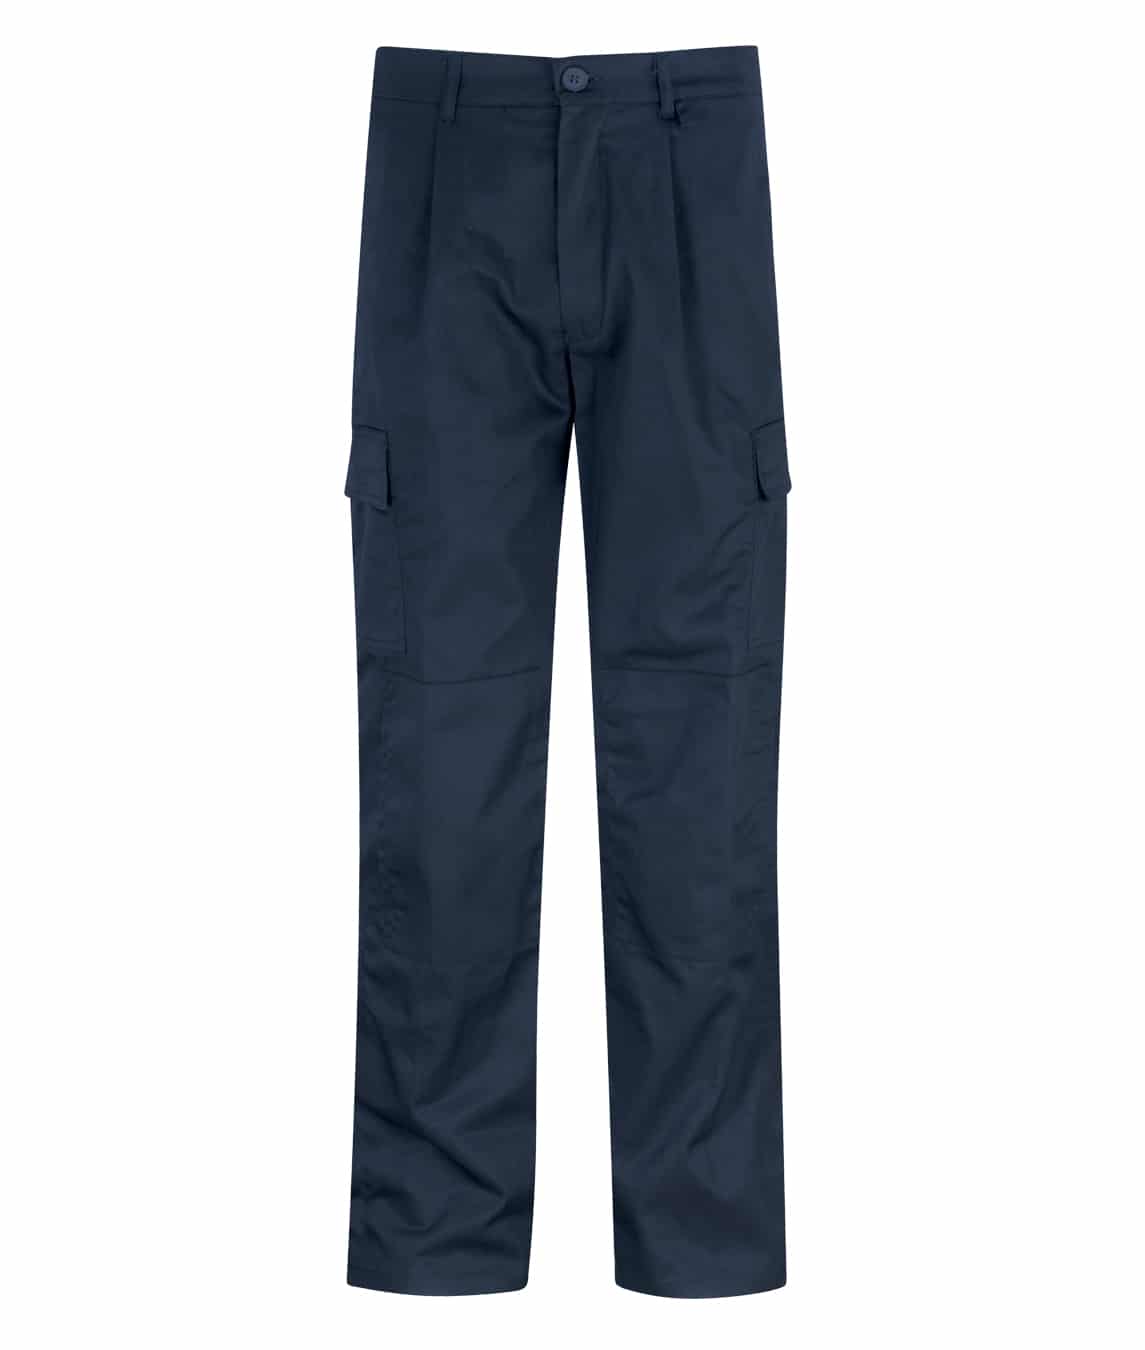 Combat Trousers Black or Navy | Provincial Safety